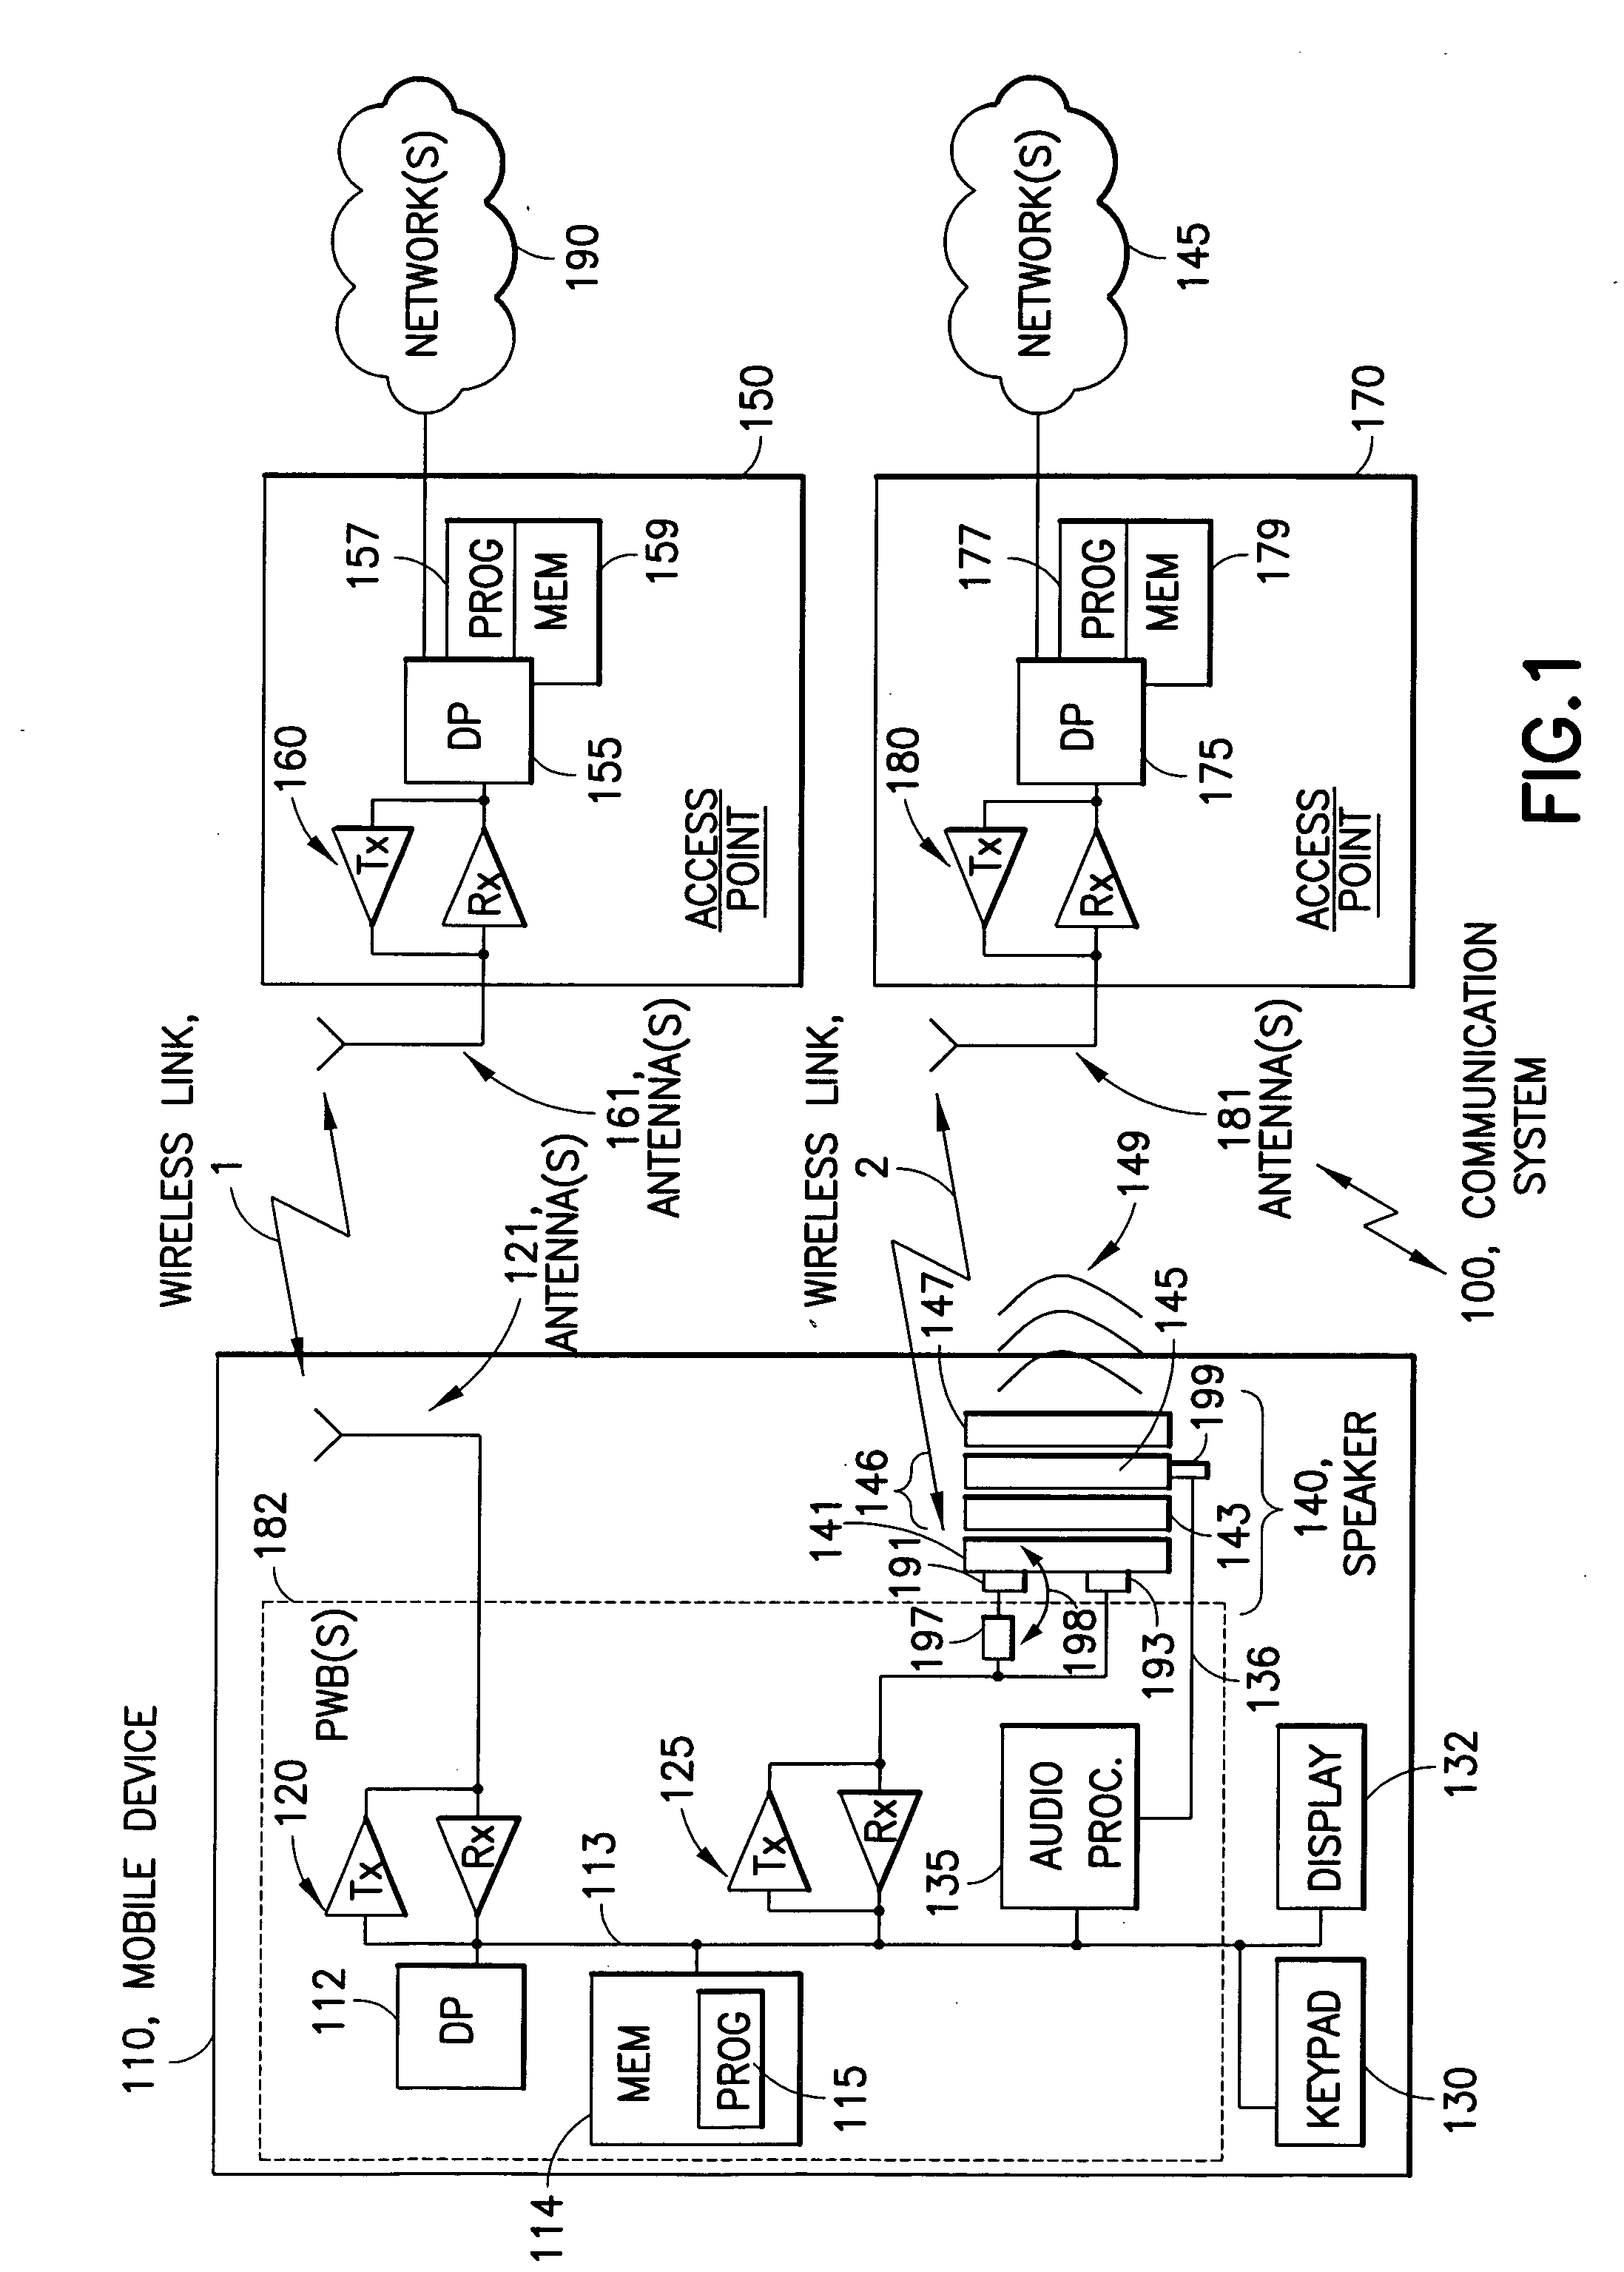 Using a conductive support of a speaker assembly as an antenna